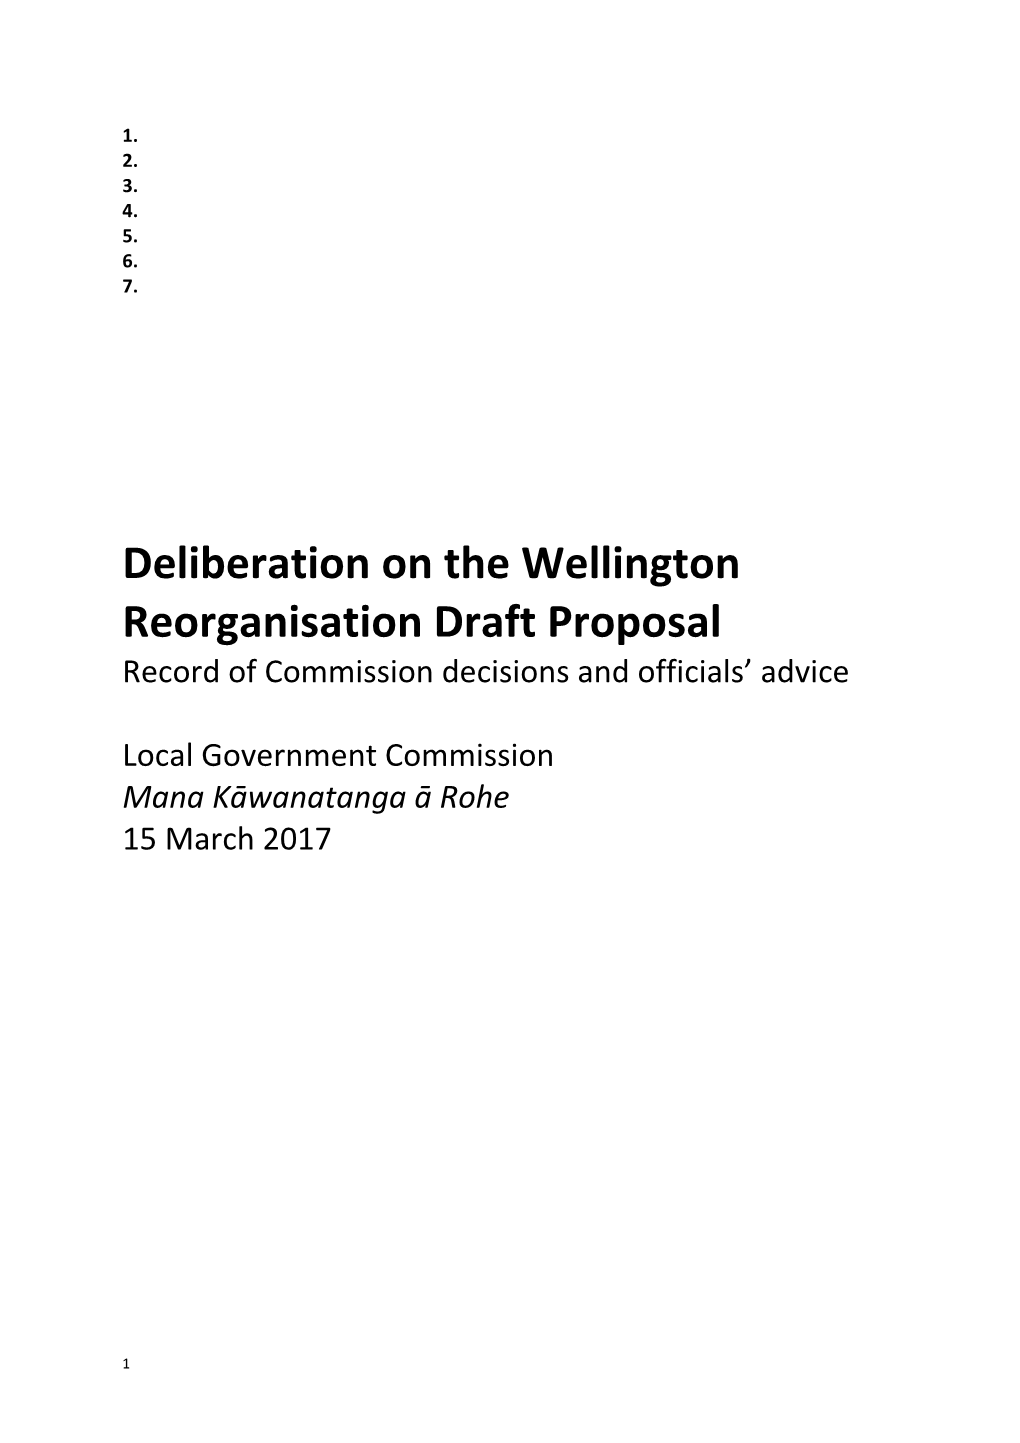 Local Government Commission March 2017 Deliberation on Wellington Reorganisation Draft Proposal